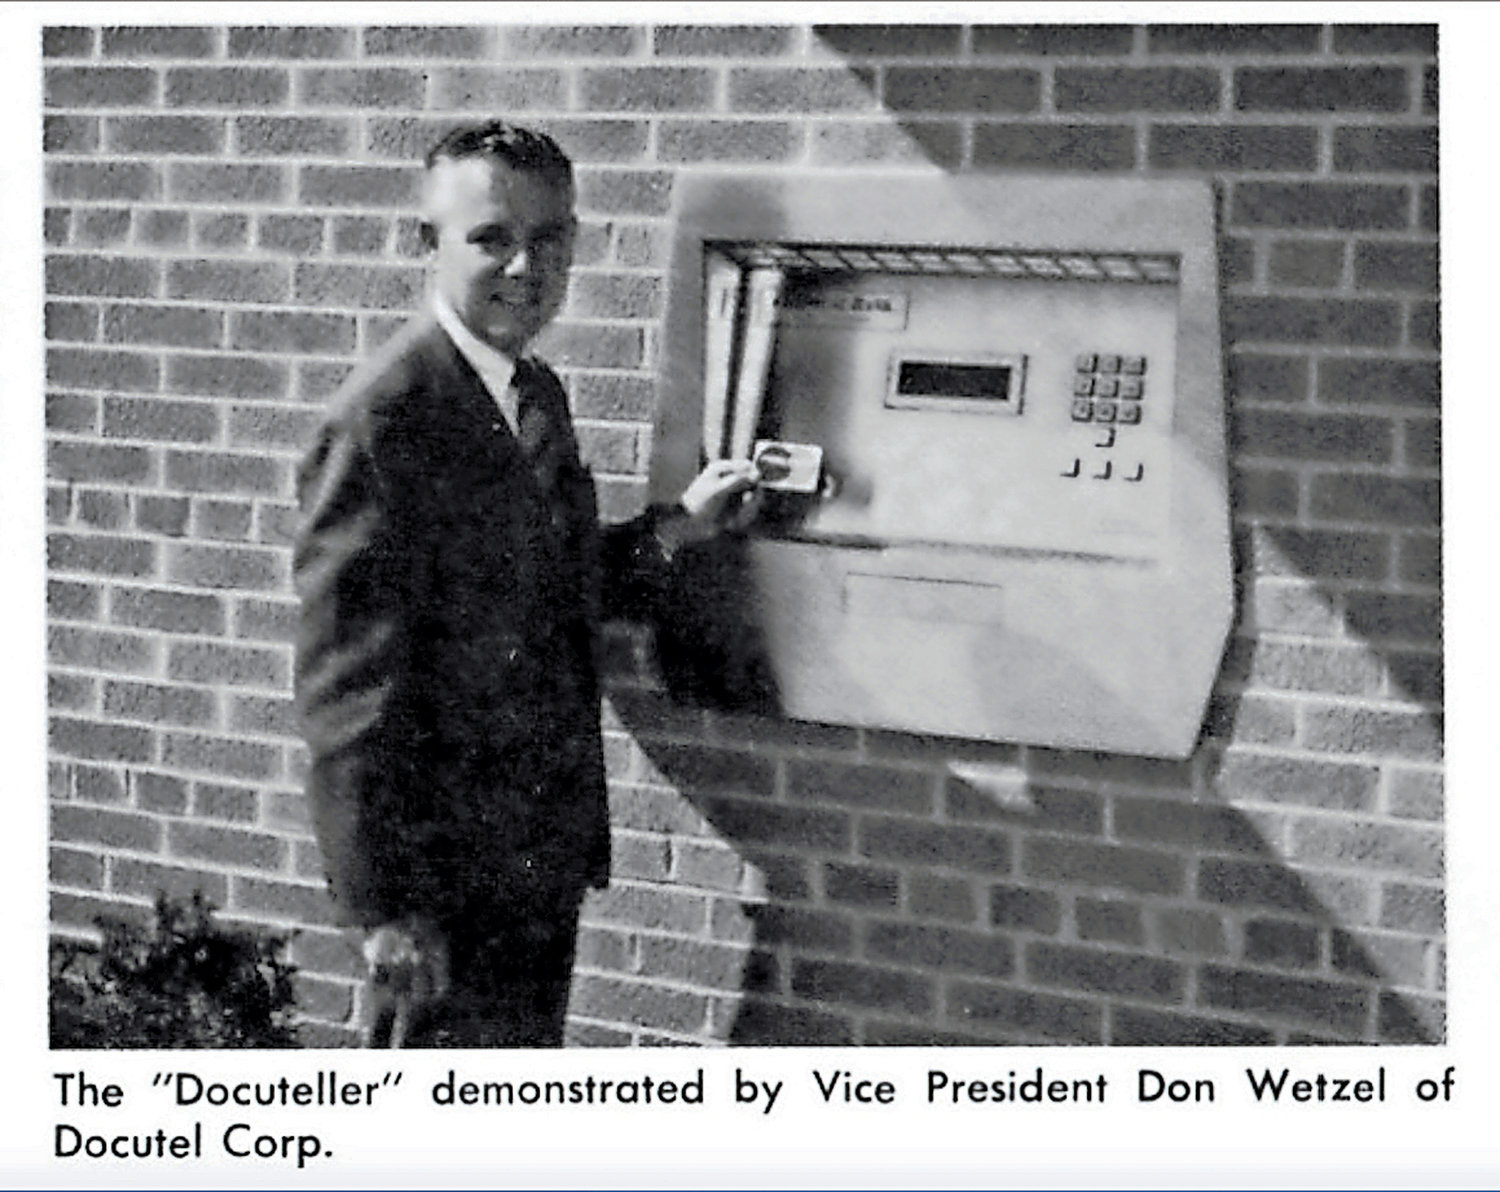 The Atm Revolution Started 50 Years Ago In Rockville Centre